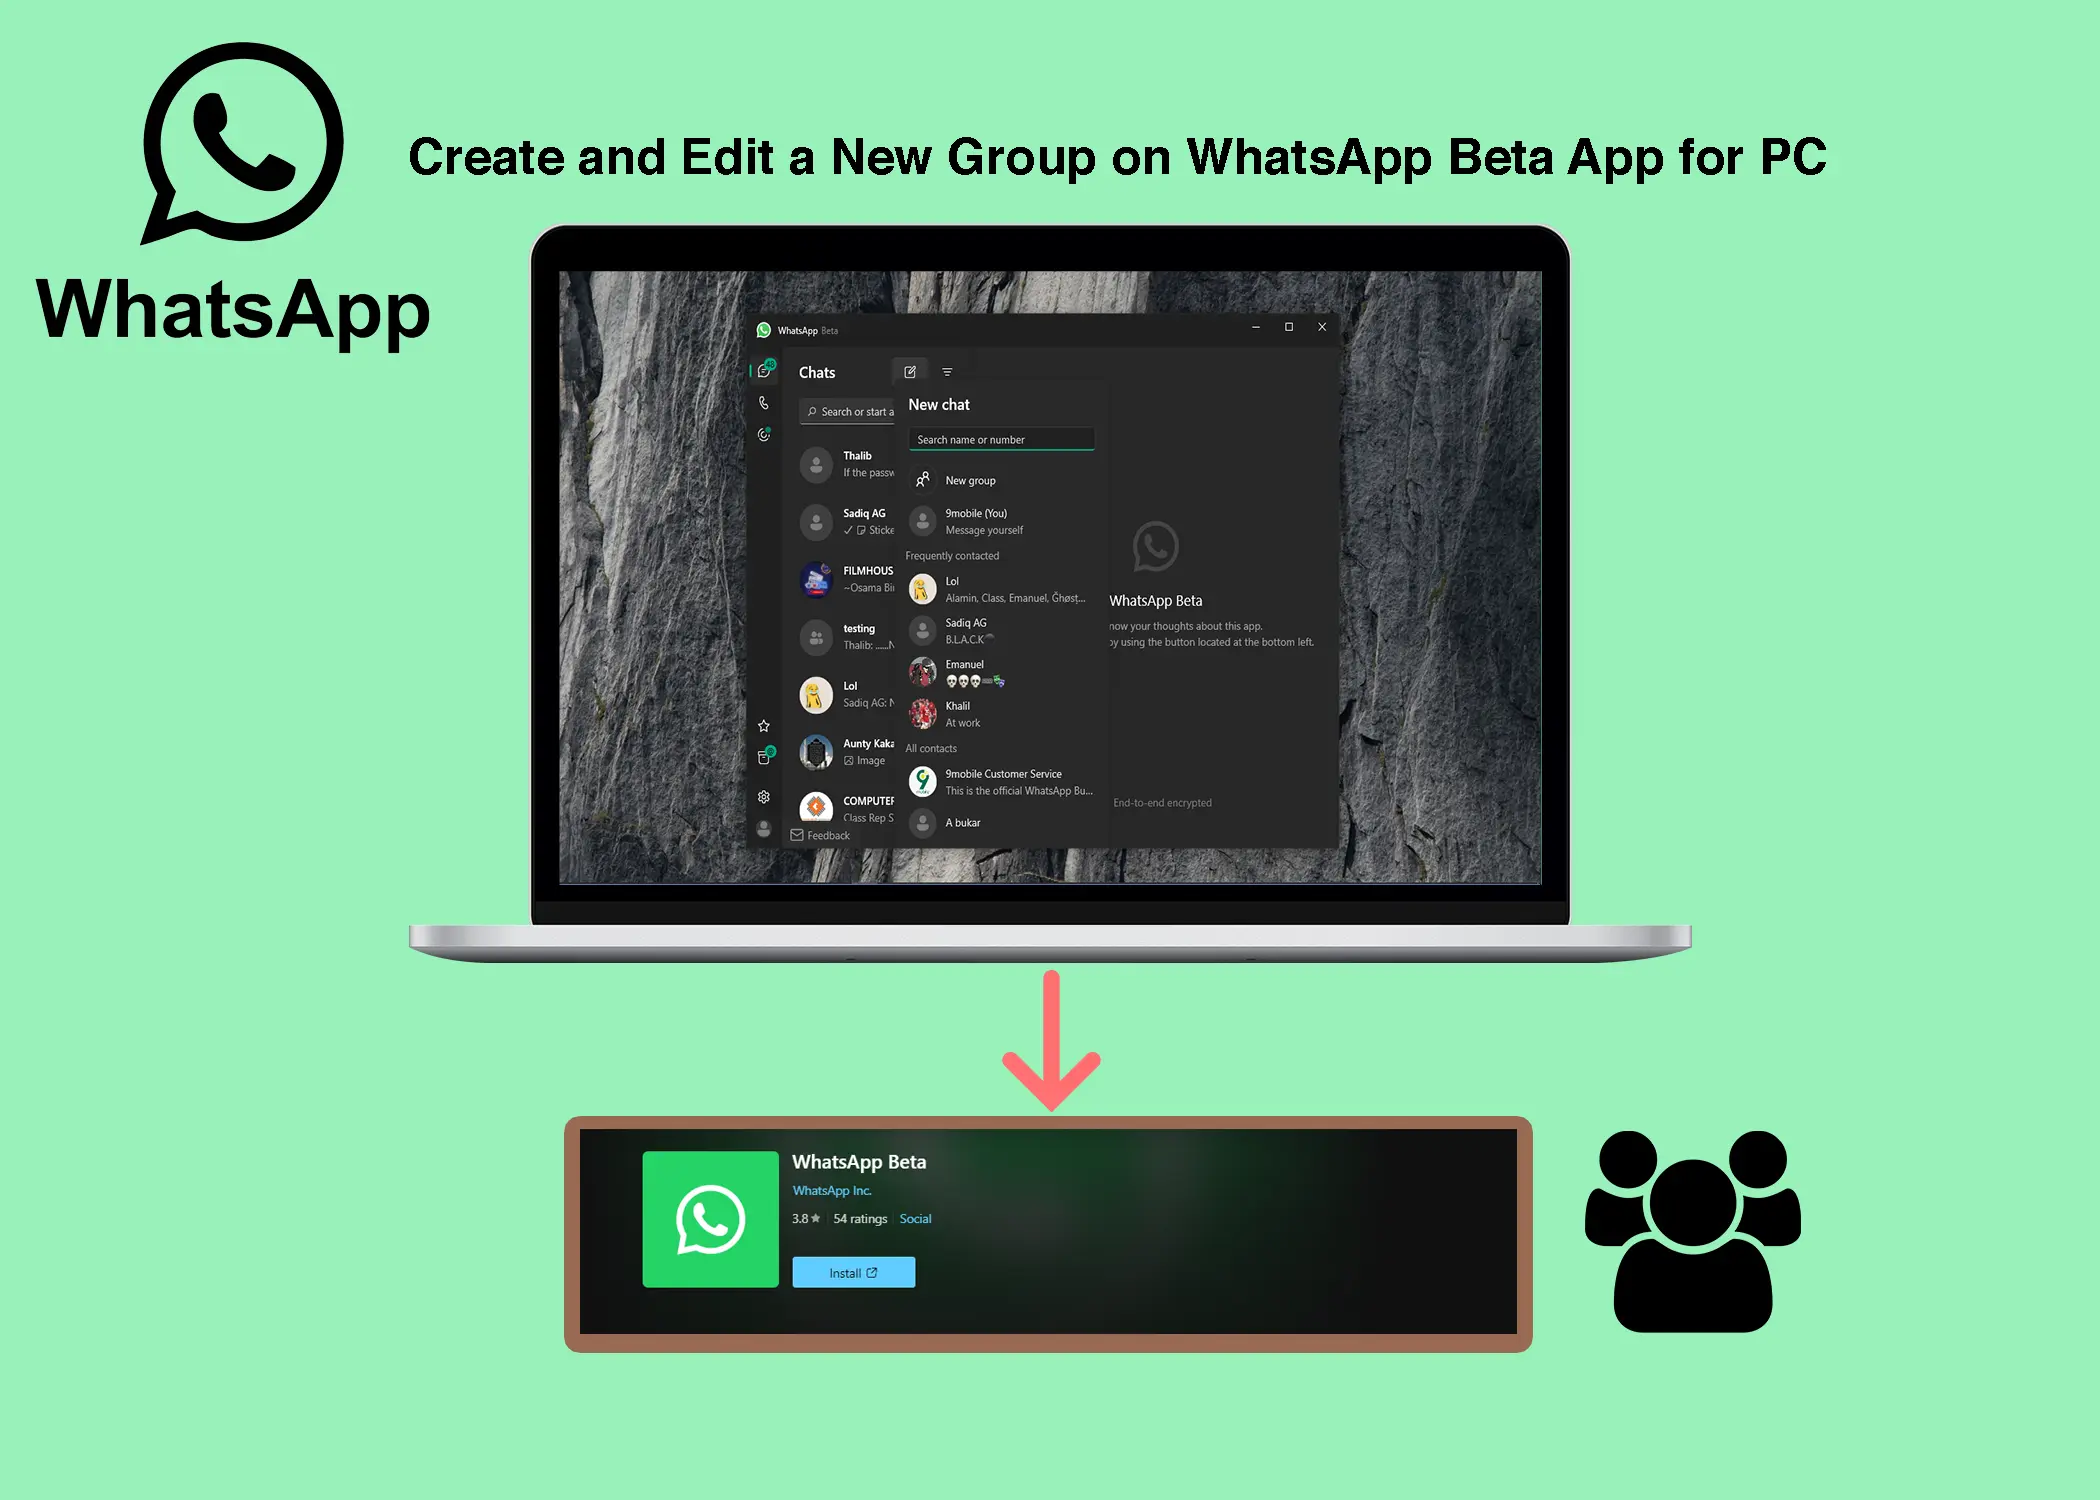 How to Create and Edit a New Group on WhatsApp Beta App for PC